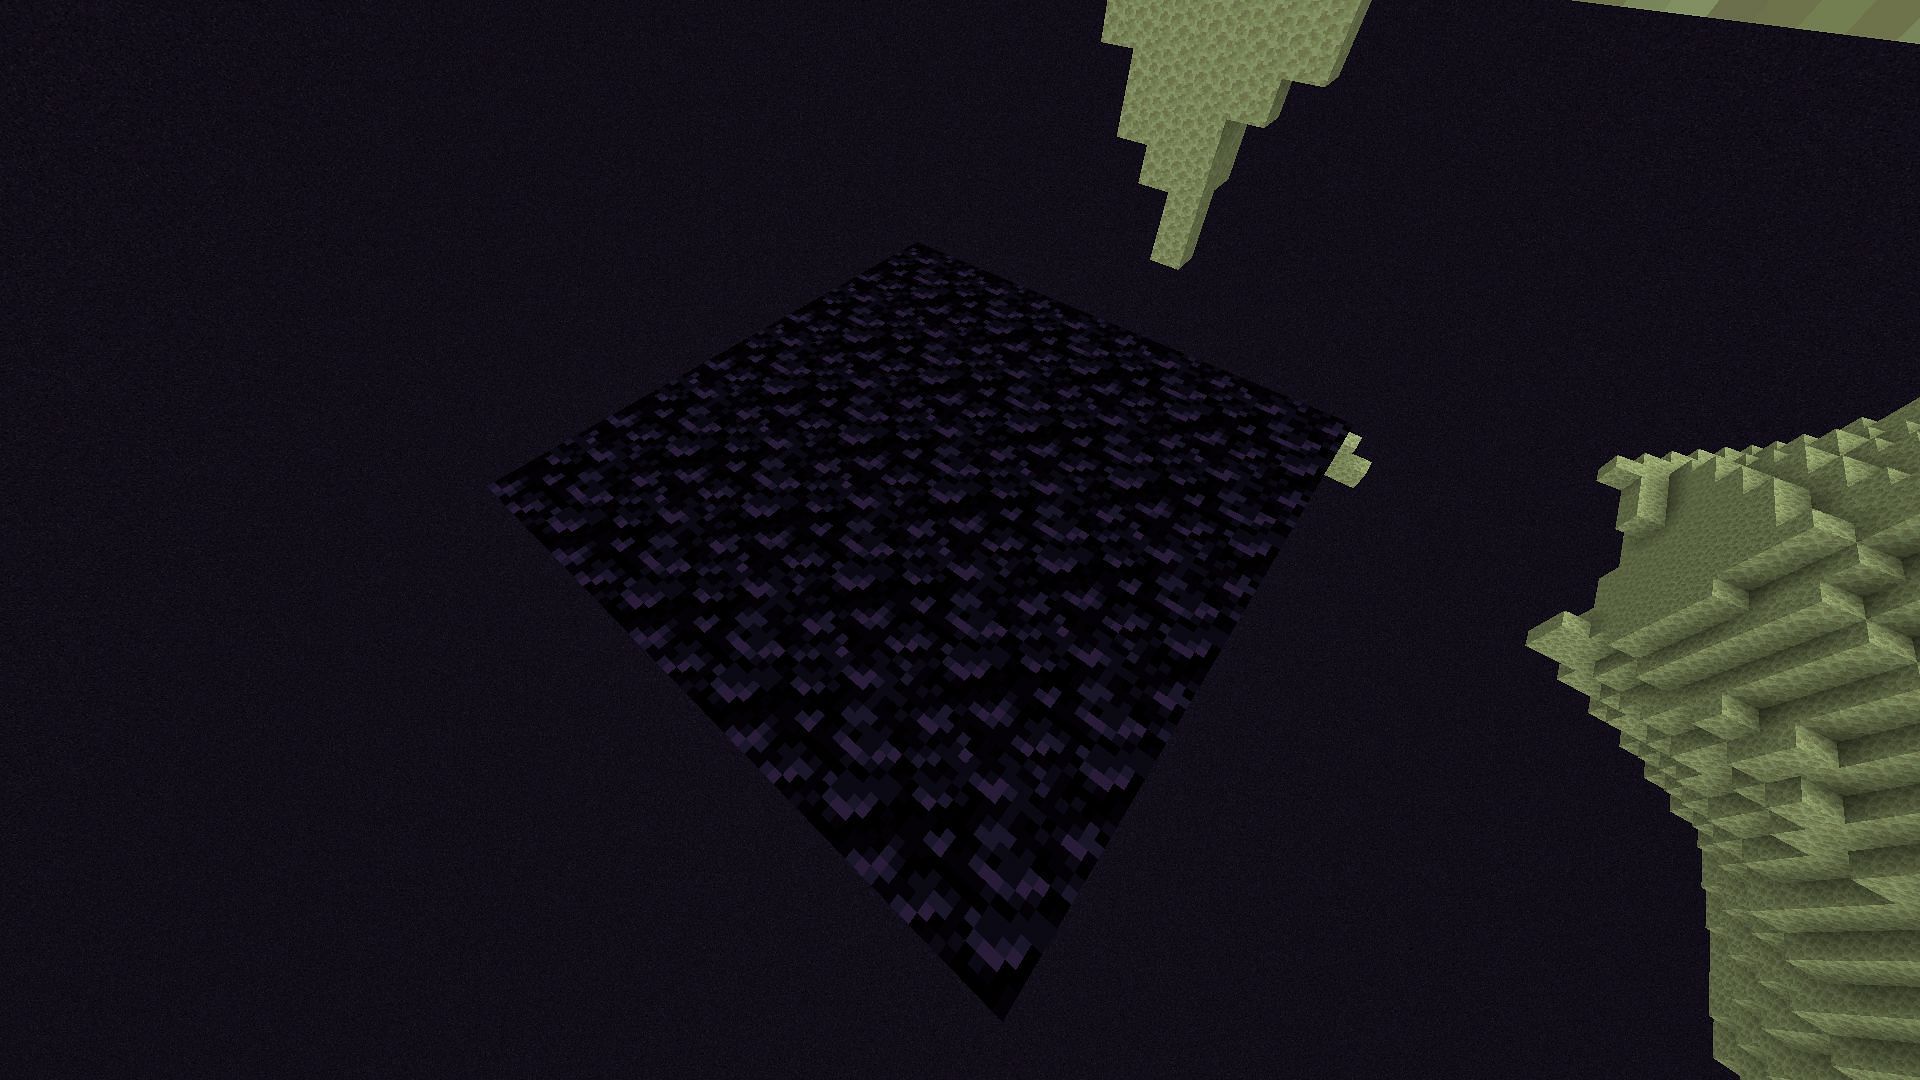 Spawning platform can generate anywhere near the main end island in Minecraft (Image via Mojang)